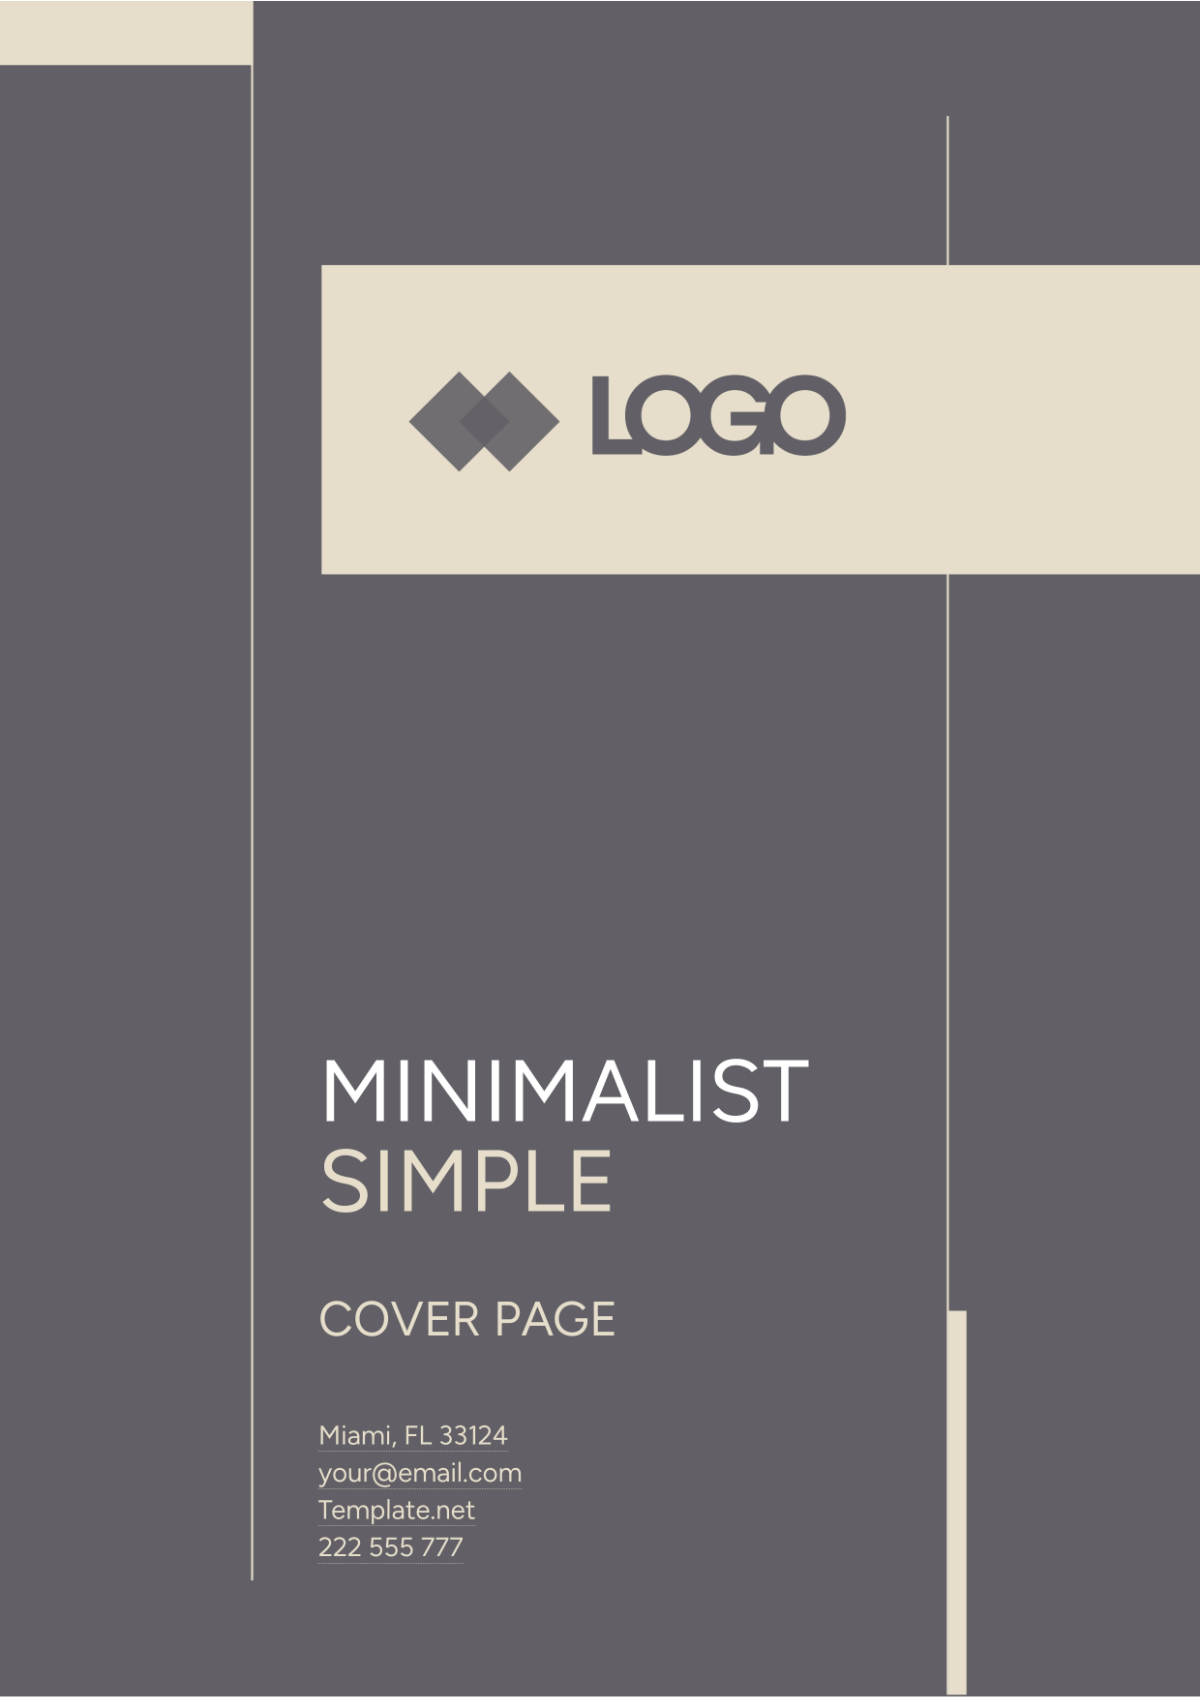 Minimalist Simple Cover Page Template